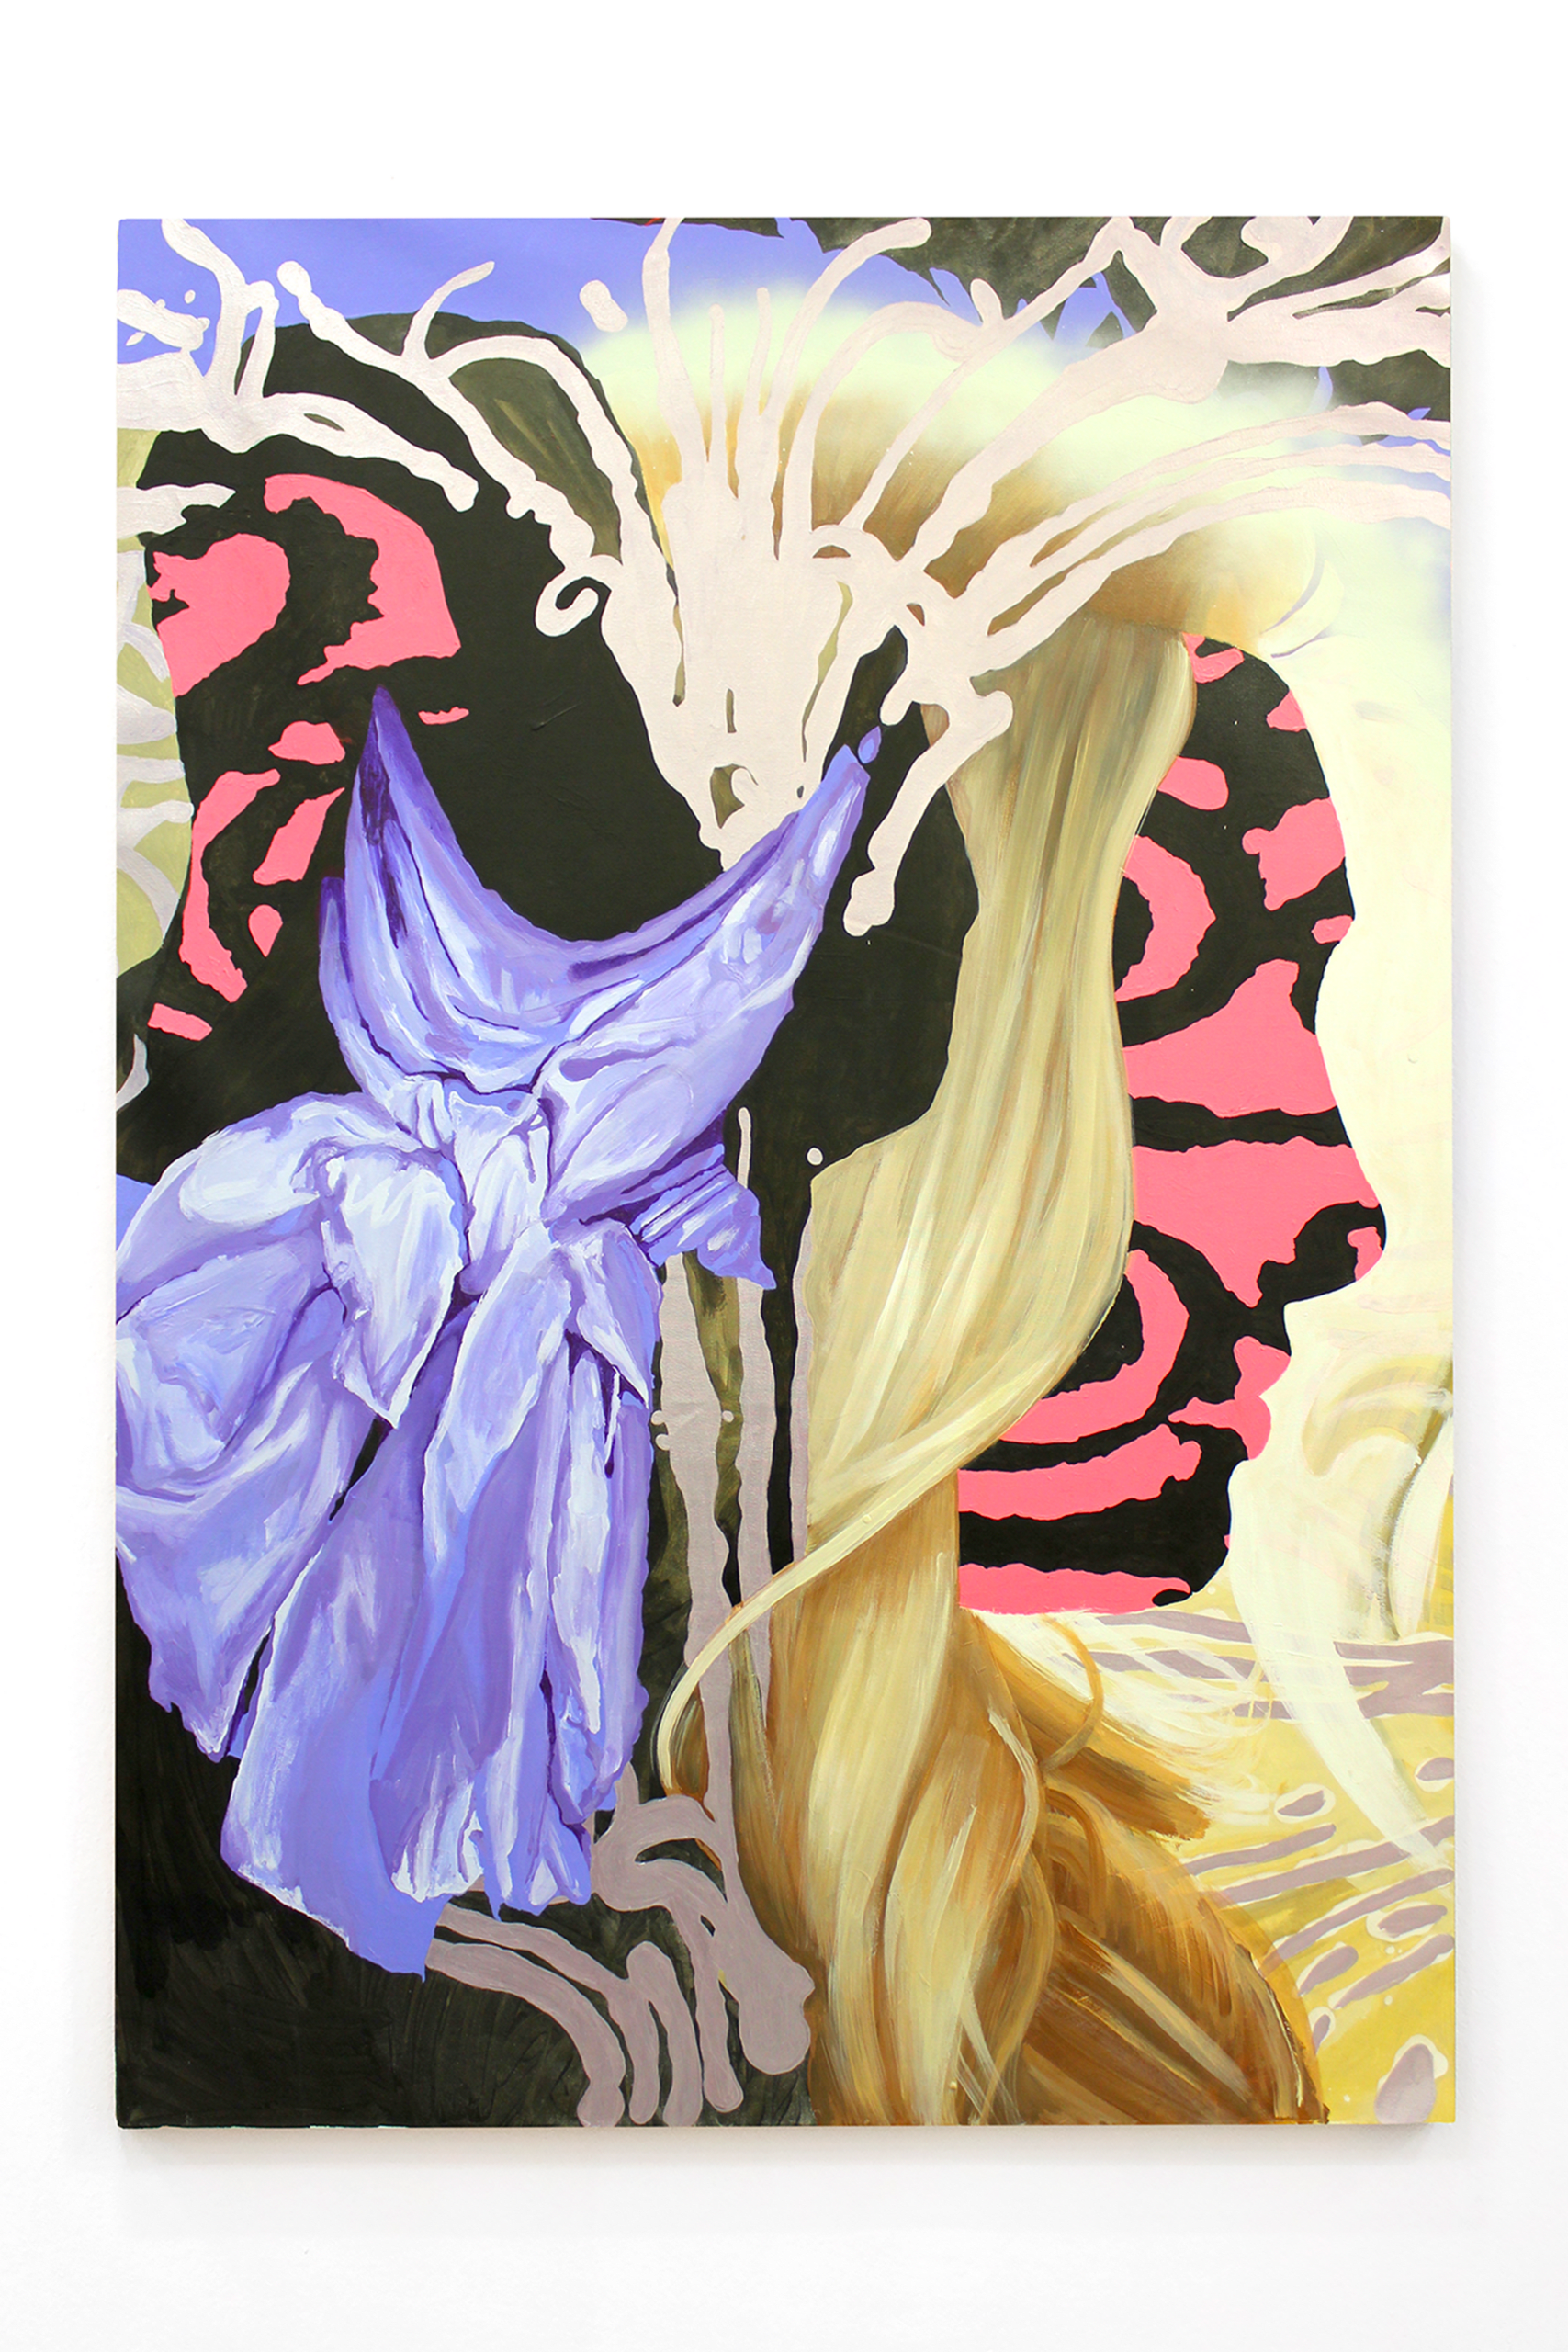 Abstract image of a head, turned almost in profile, with long blonde hair created from different contrasting elements and with the outline of the face filled with a pink and black pattern.